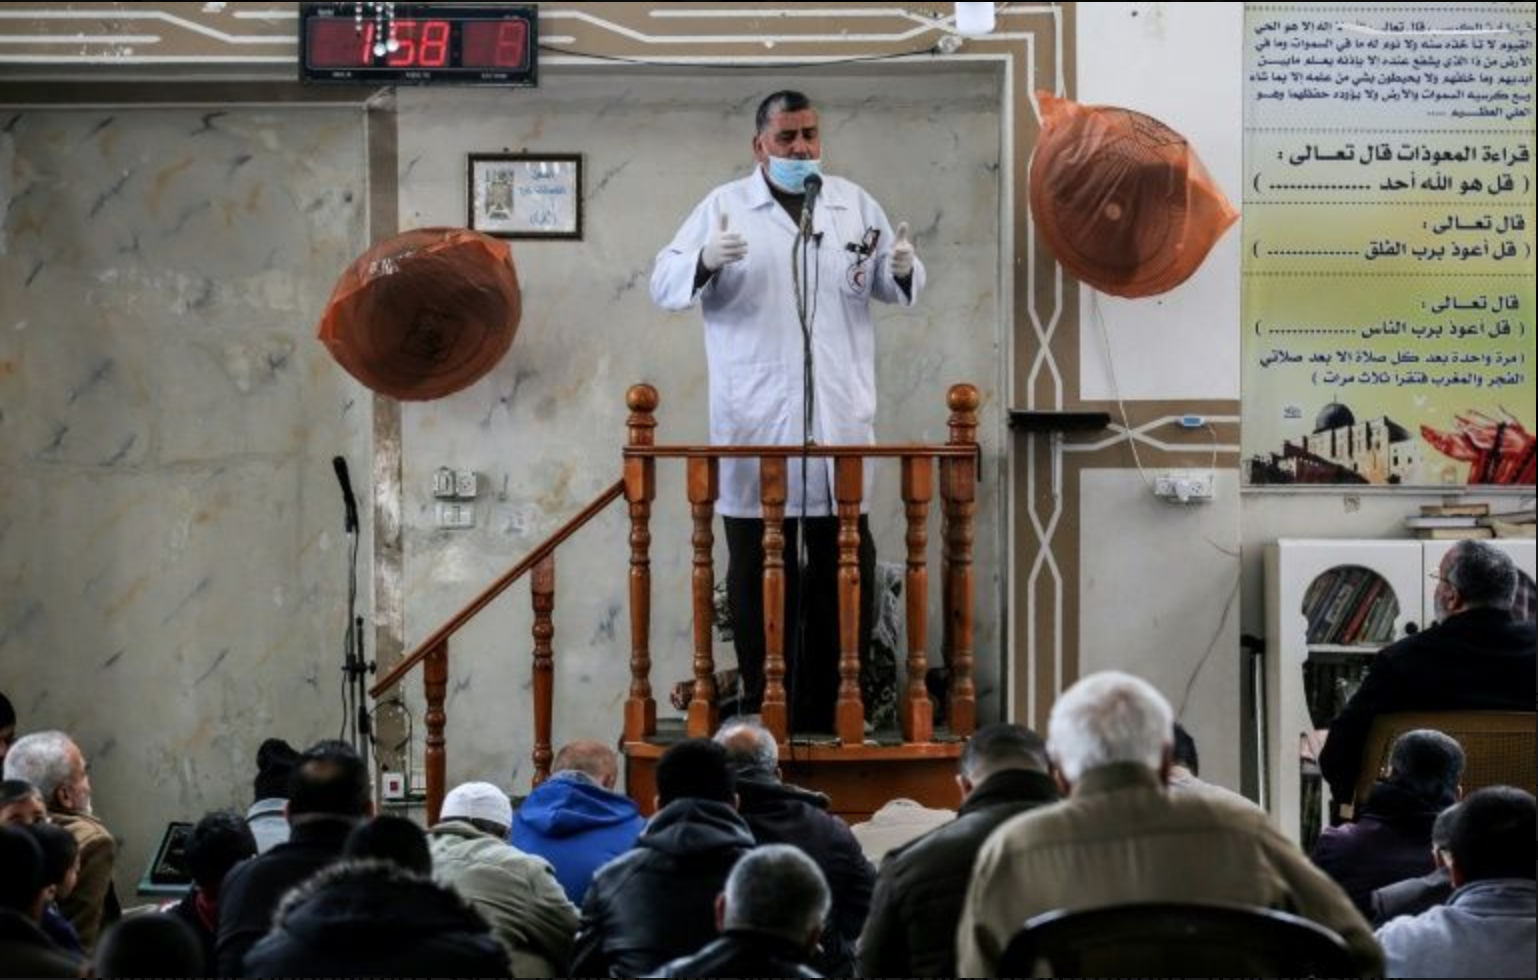 Covid-19 arrives in Gaza, where healthcare is collapsing